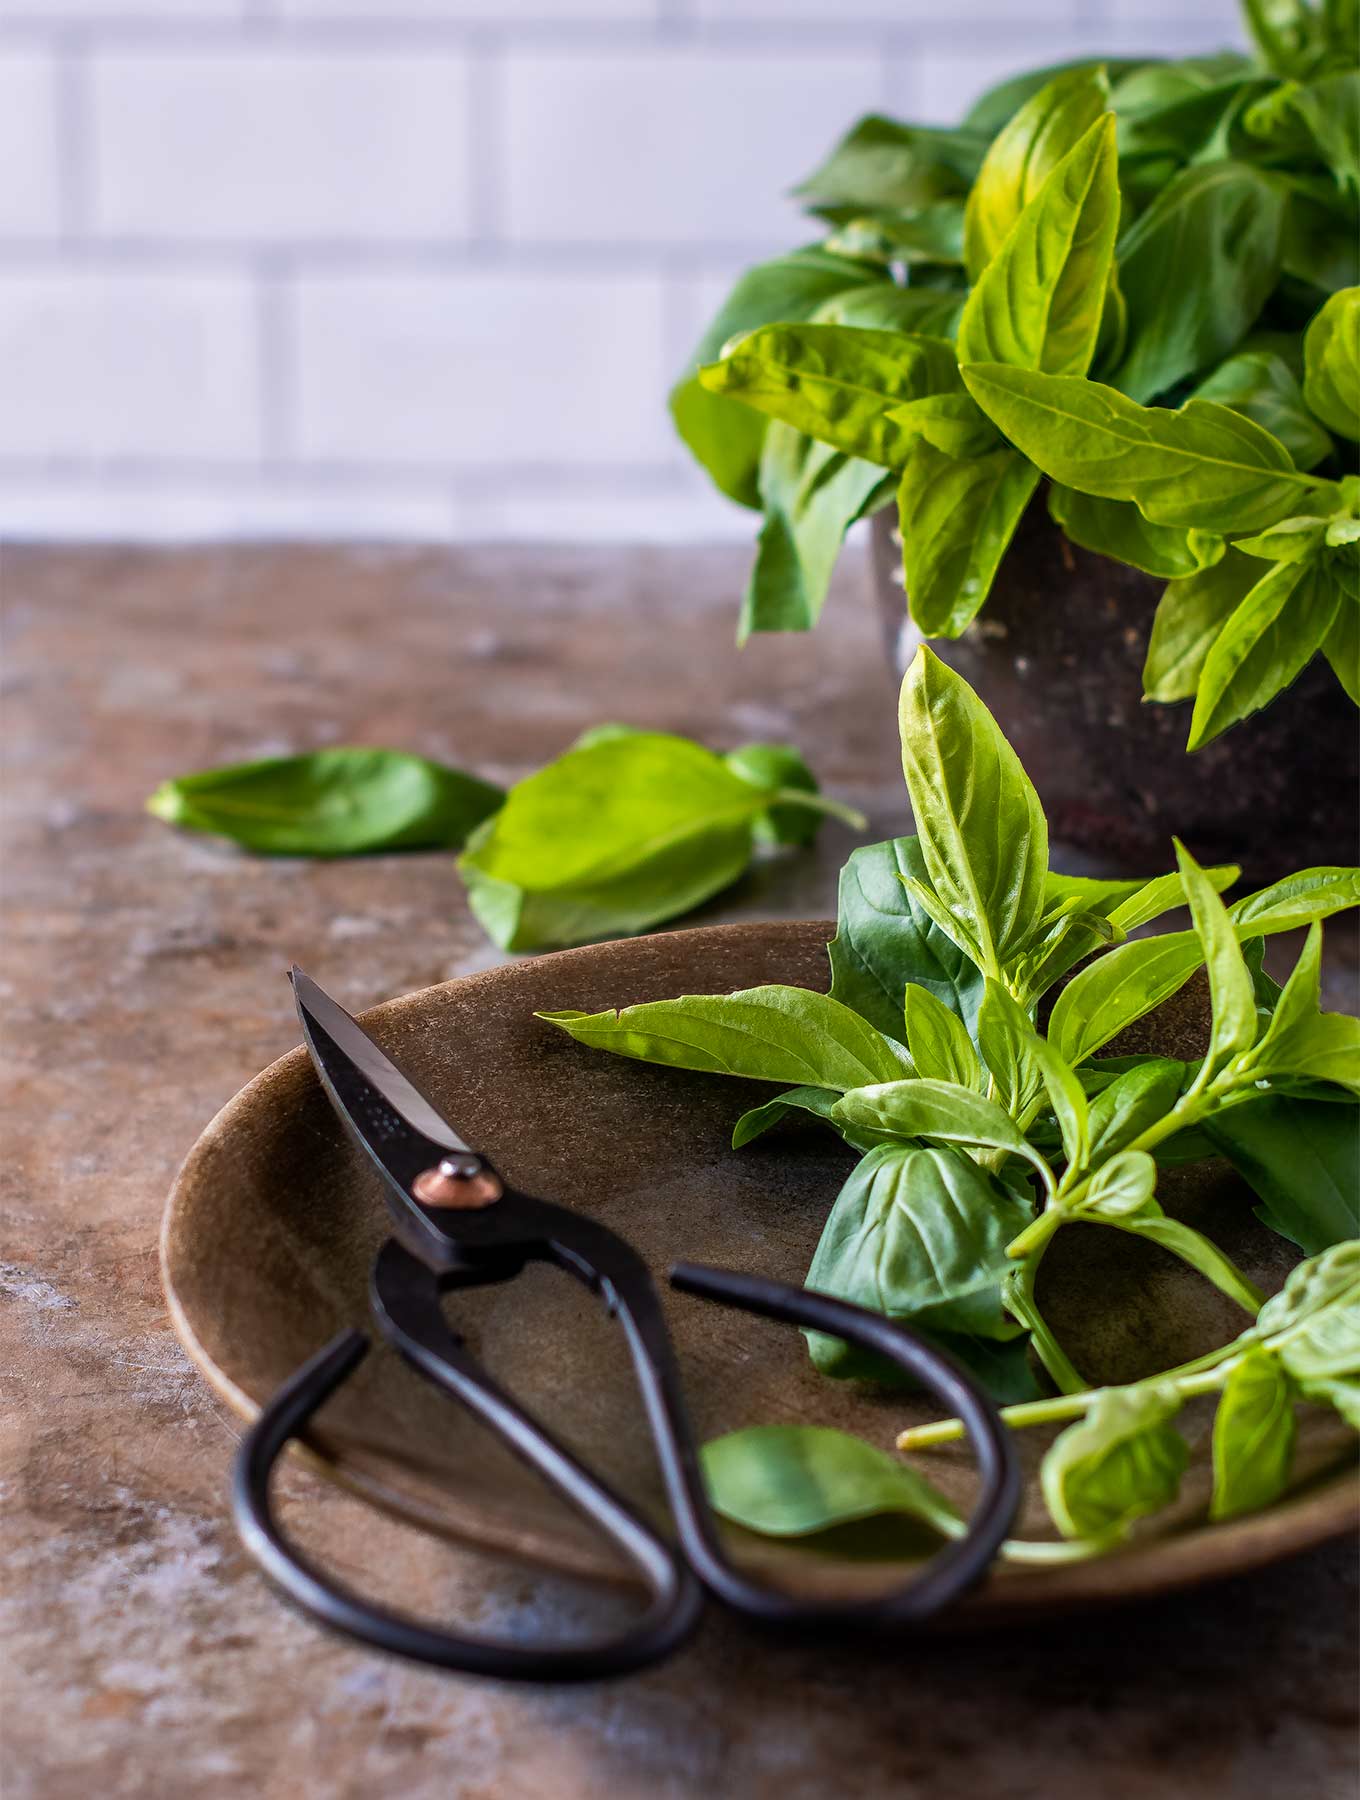 Plate of fresh basil with scissors